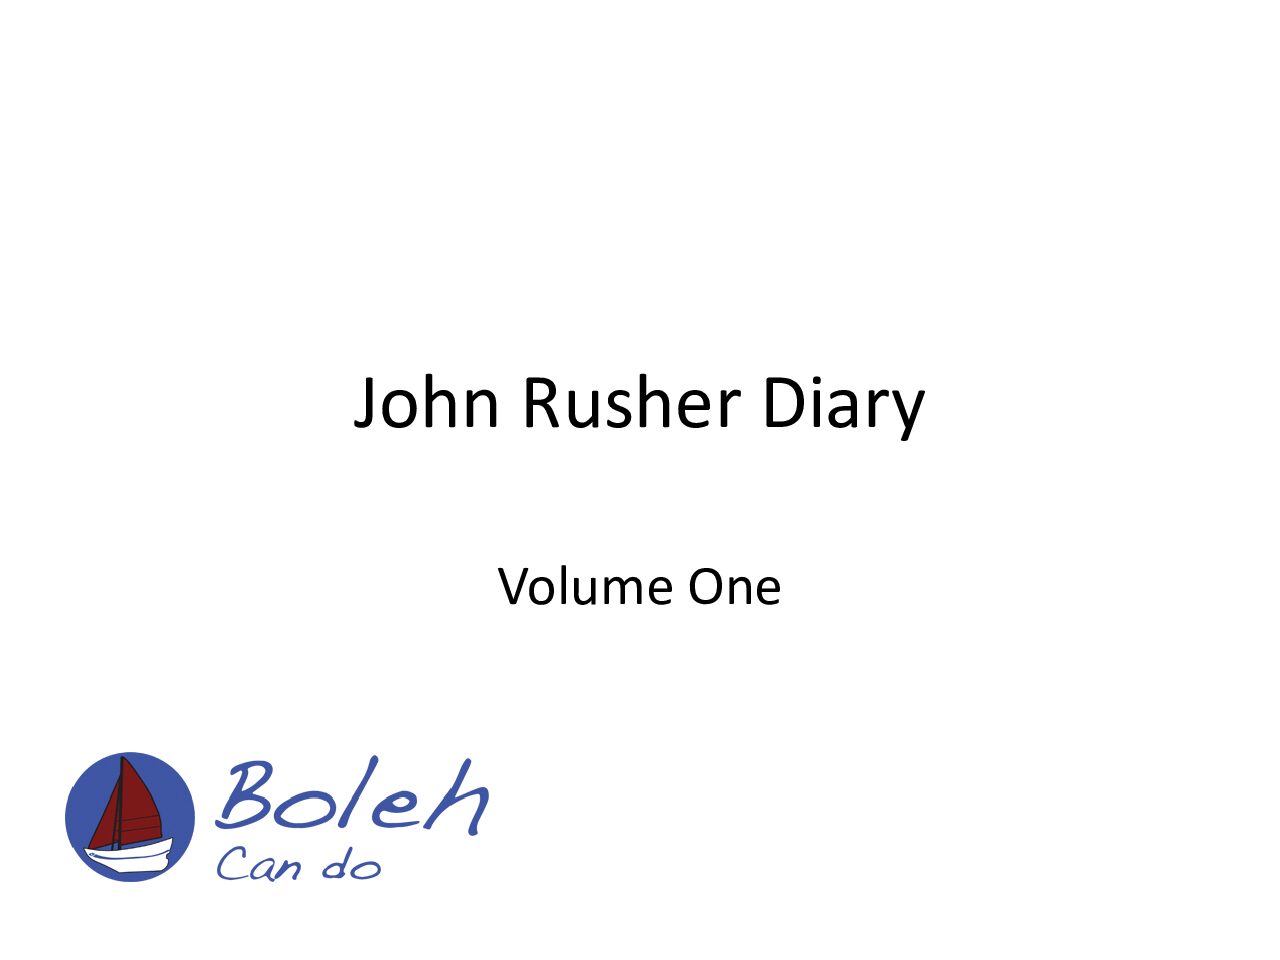 The Diary of Commander J J S Rusher of the Boleh voyage from Singapore in 1950